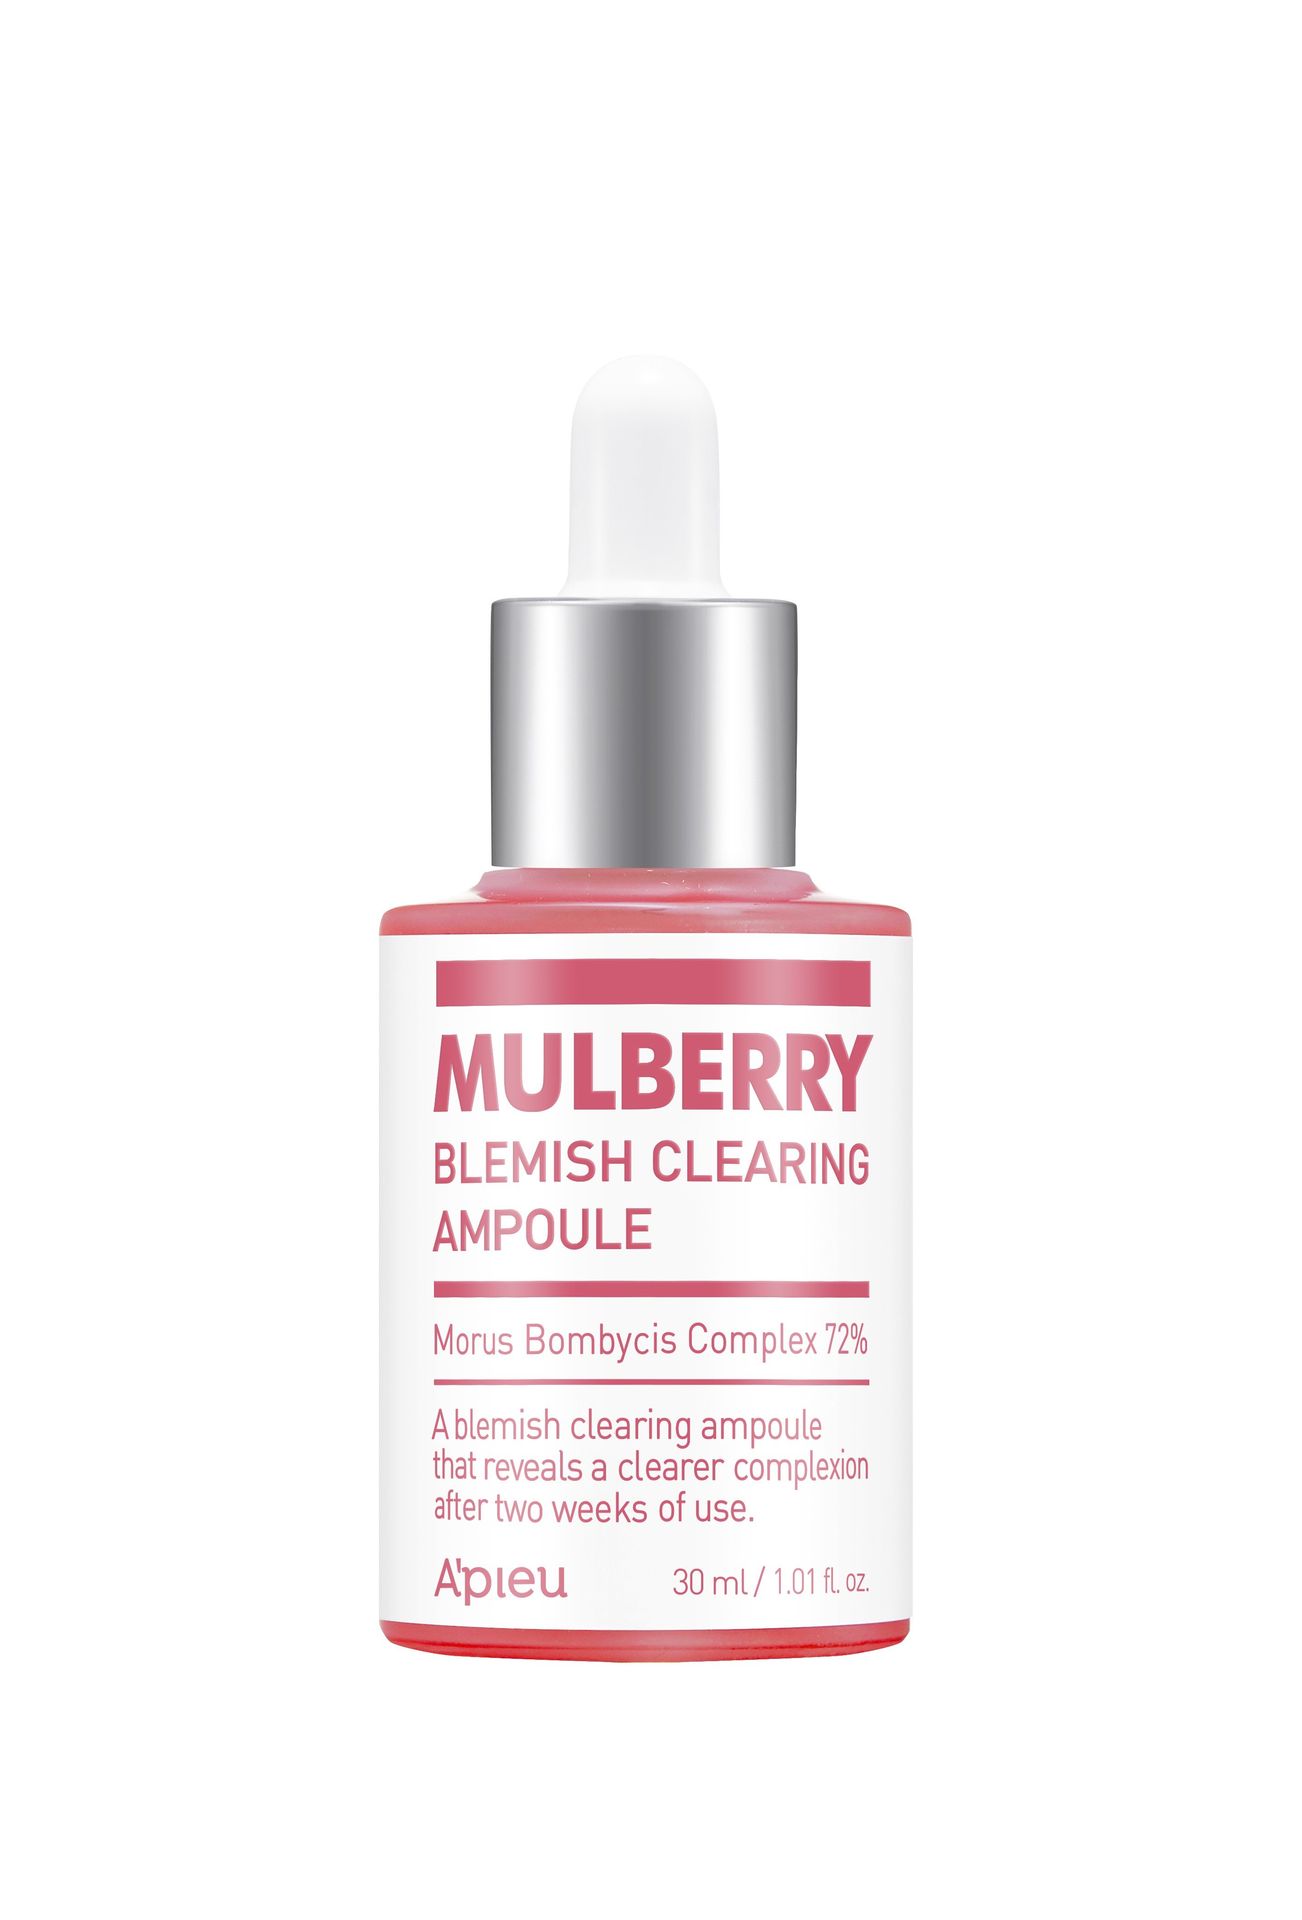 MULBERRY BLEMISH CLEARING AMPOULE